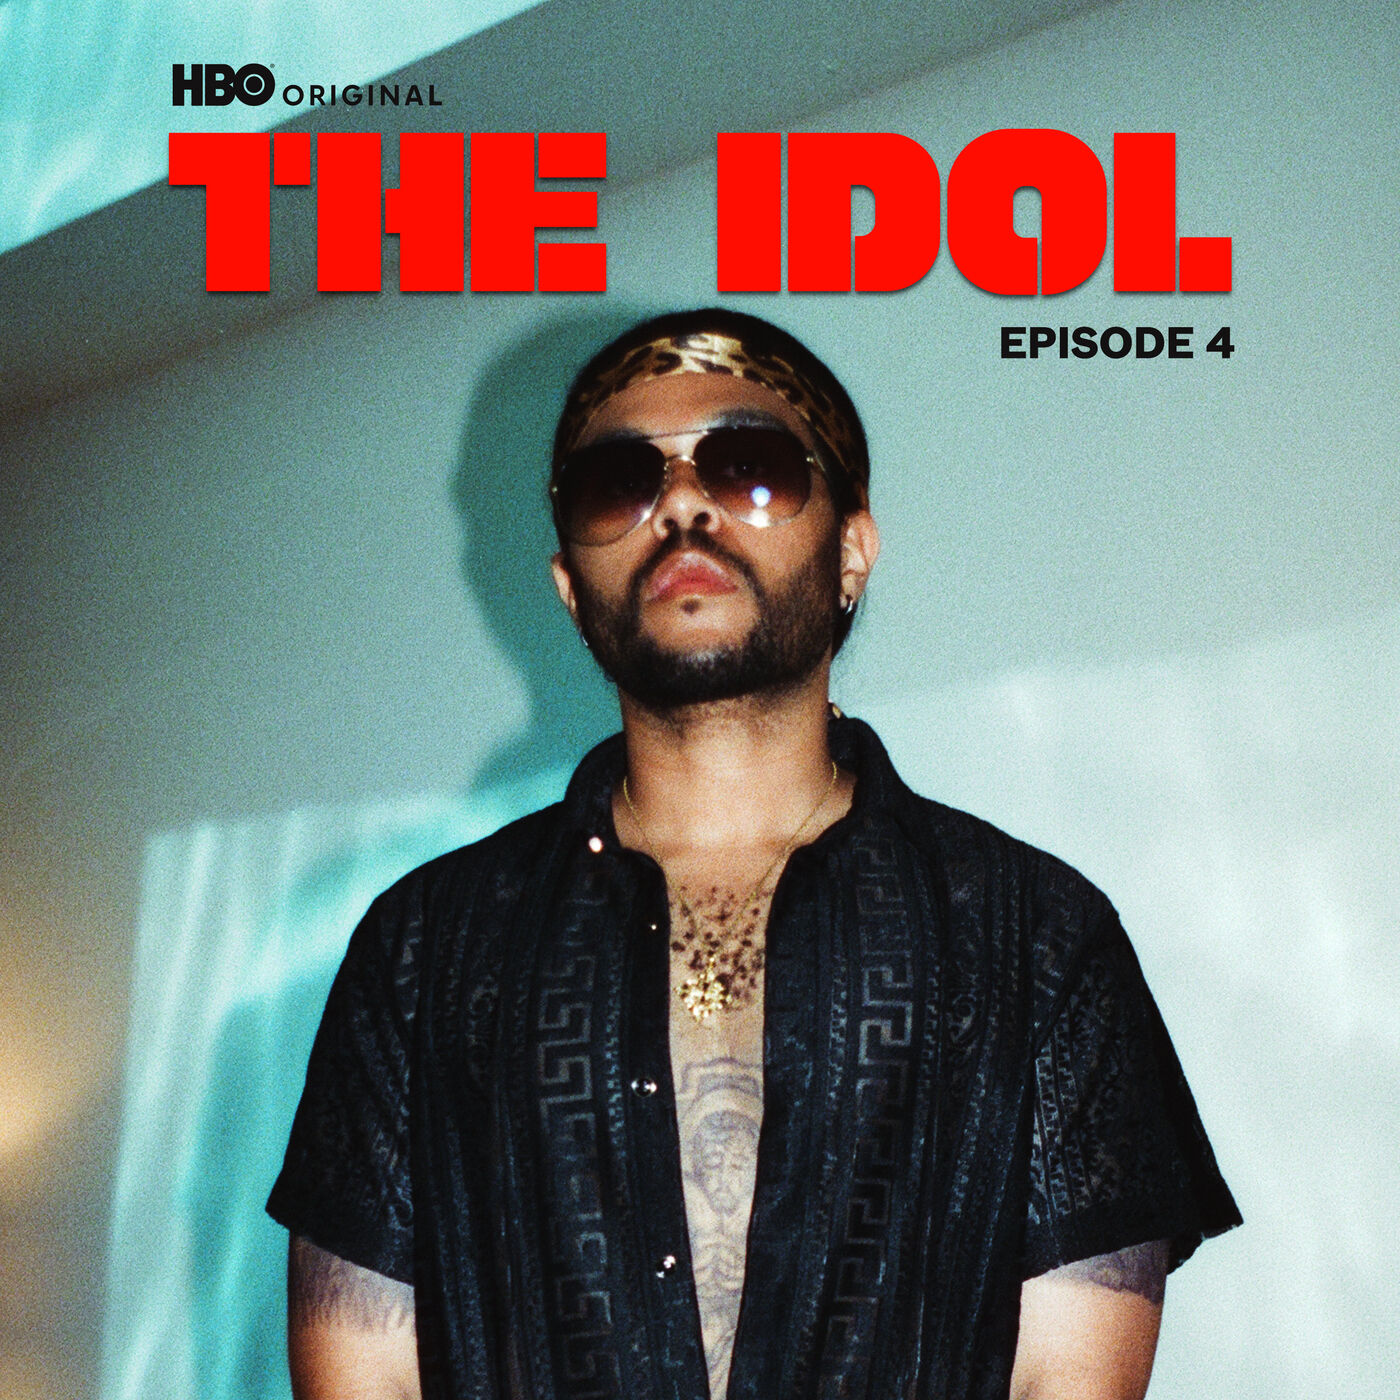 The Weeknd – The Idol Episode 4 (Music from the HBO Original Series)【44.1kHz／16bit】美国区-OppsUpro音乐帝国